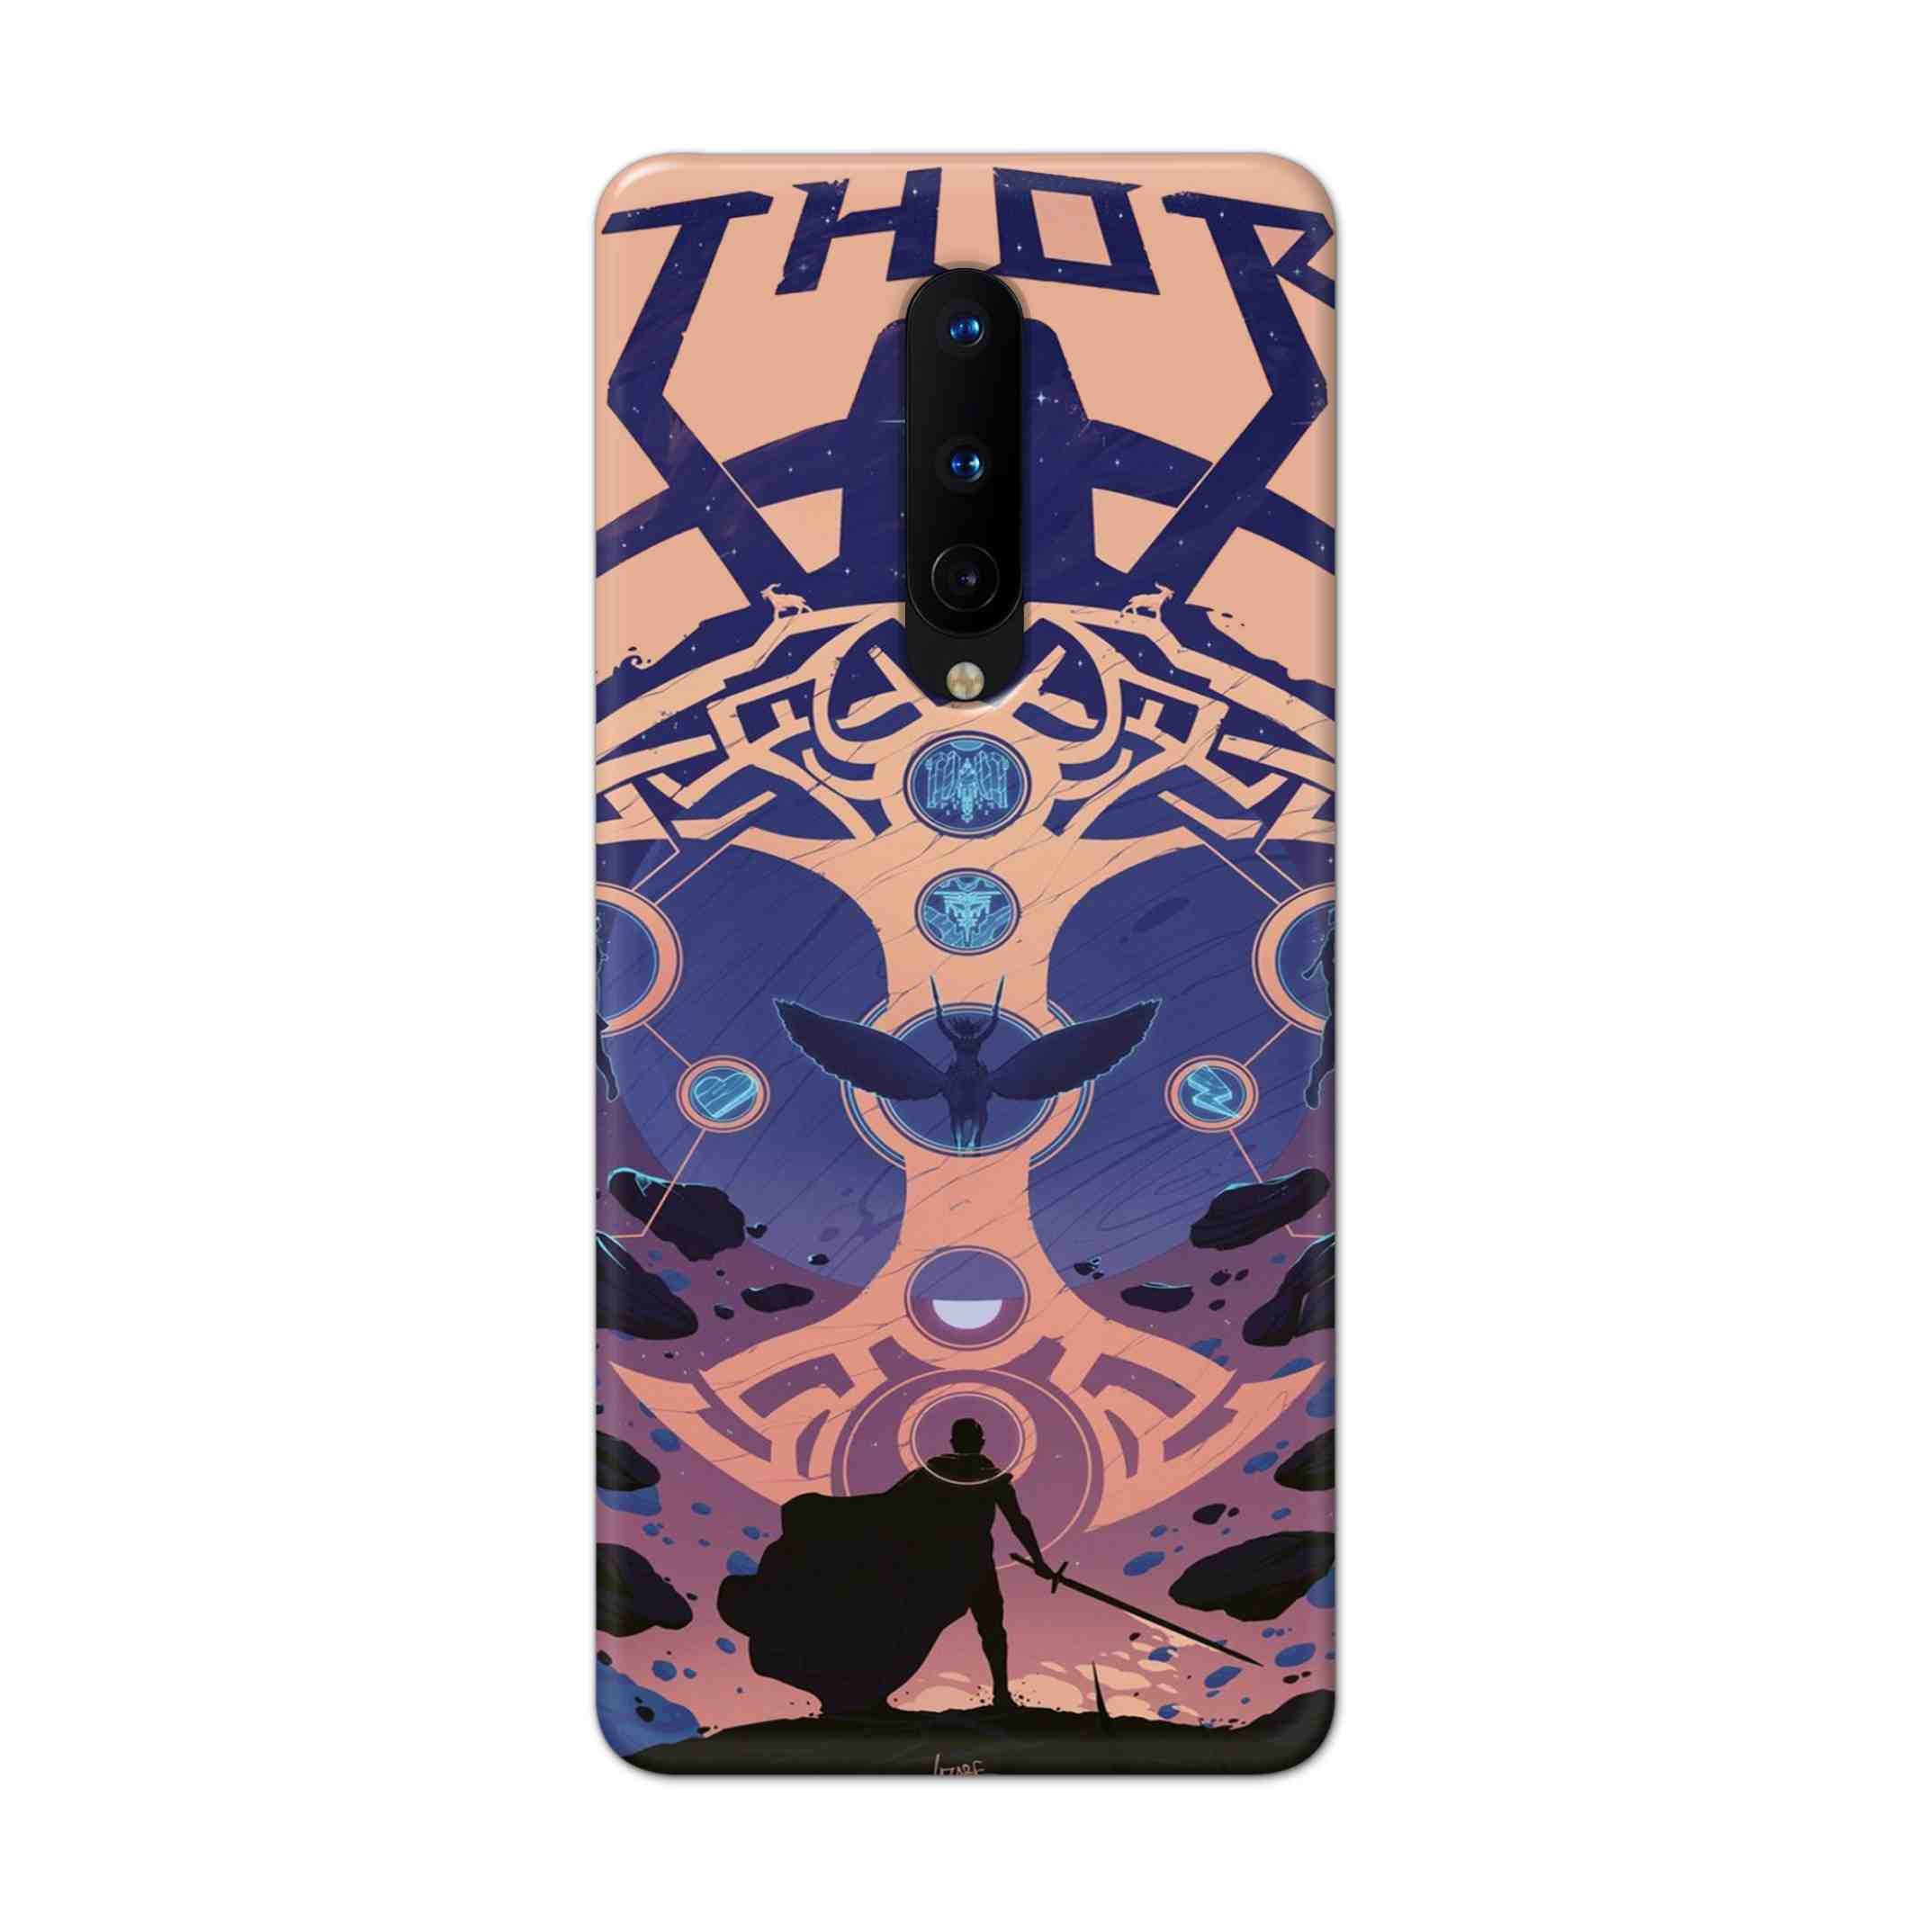 Buy Thor Hard Back Mobile Phone Case Cover For OnePlus 8 Online